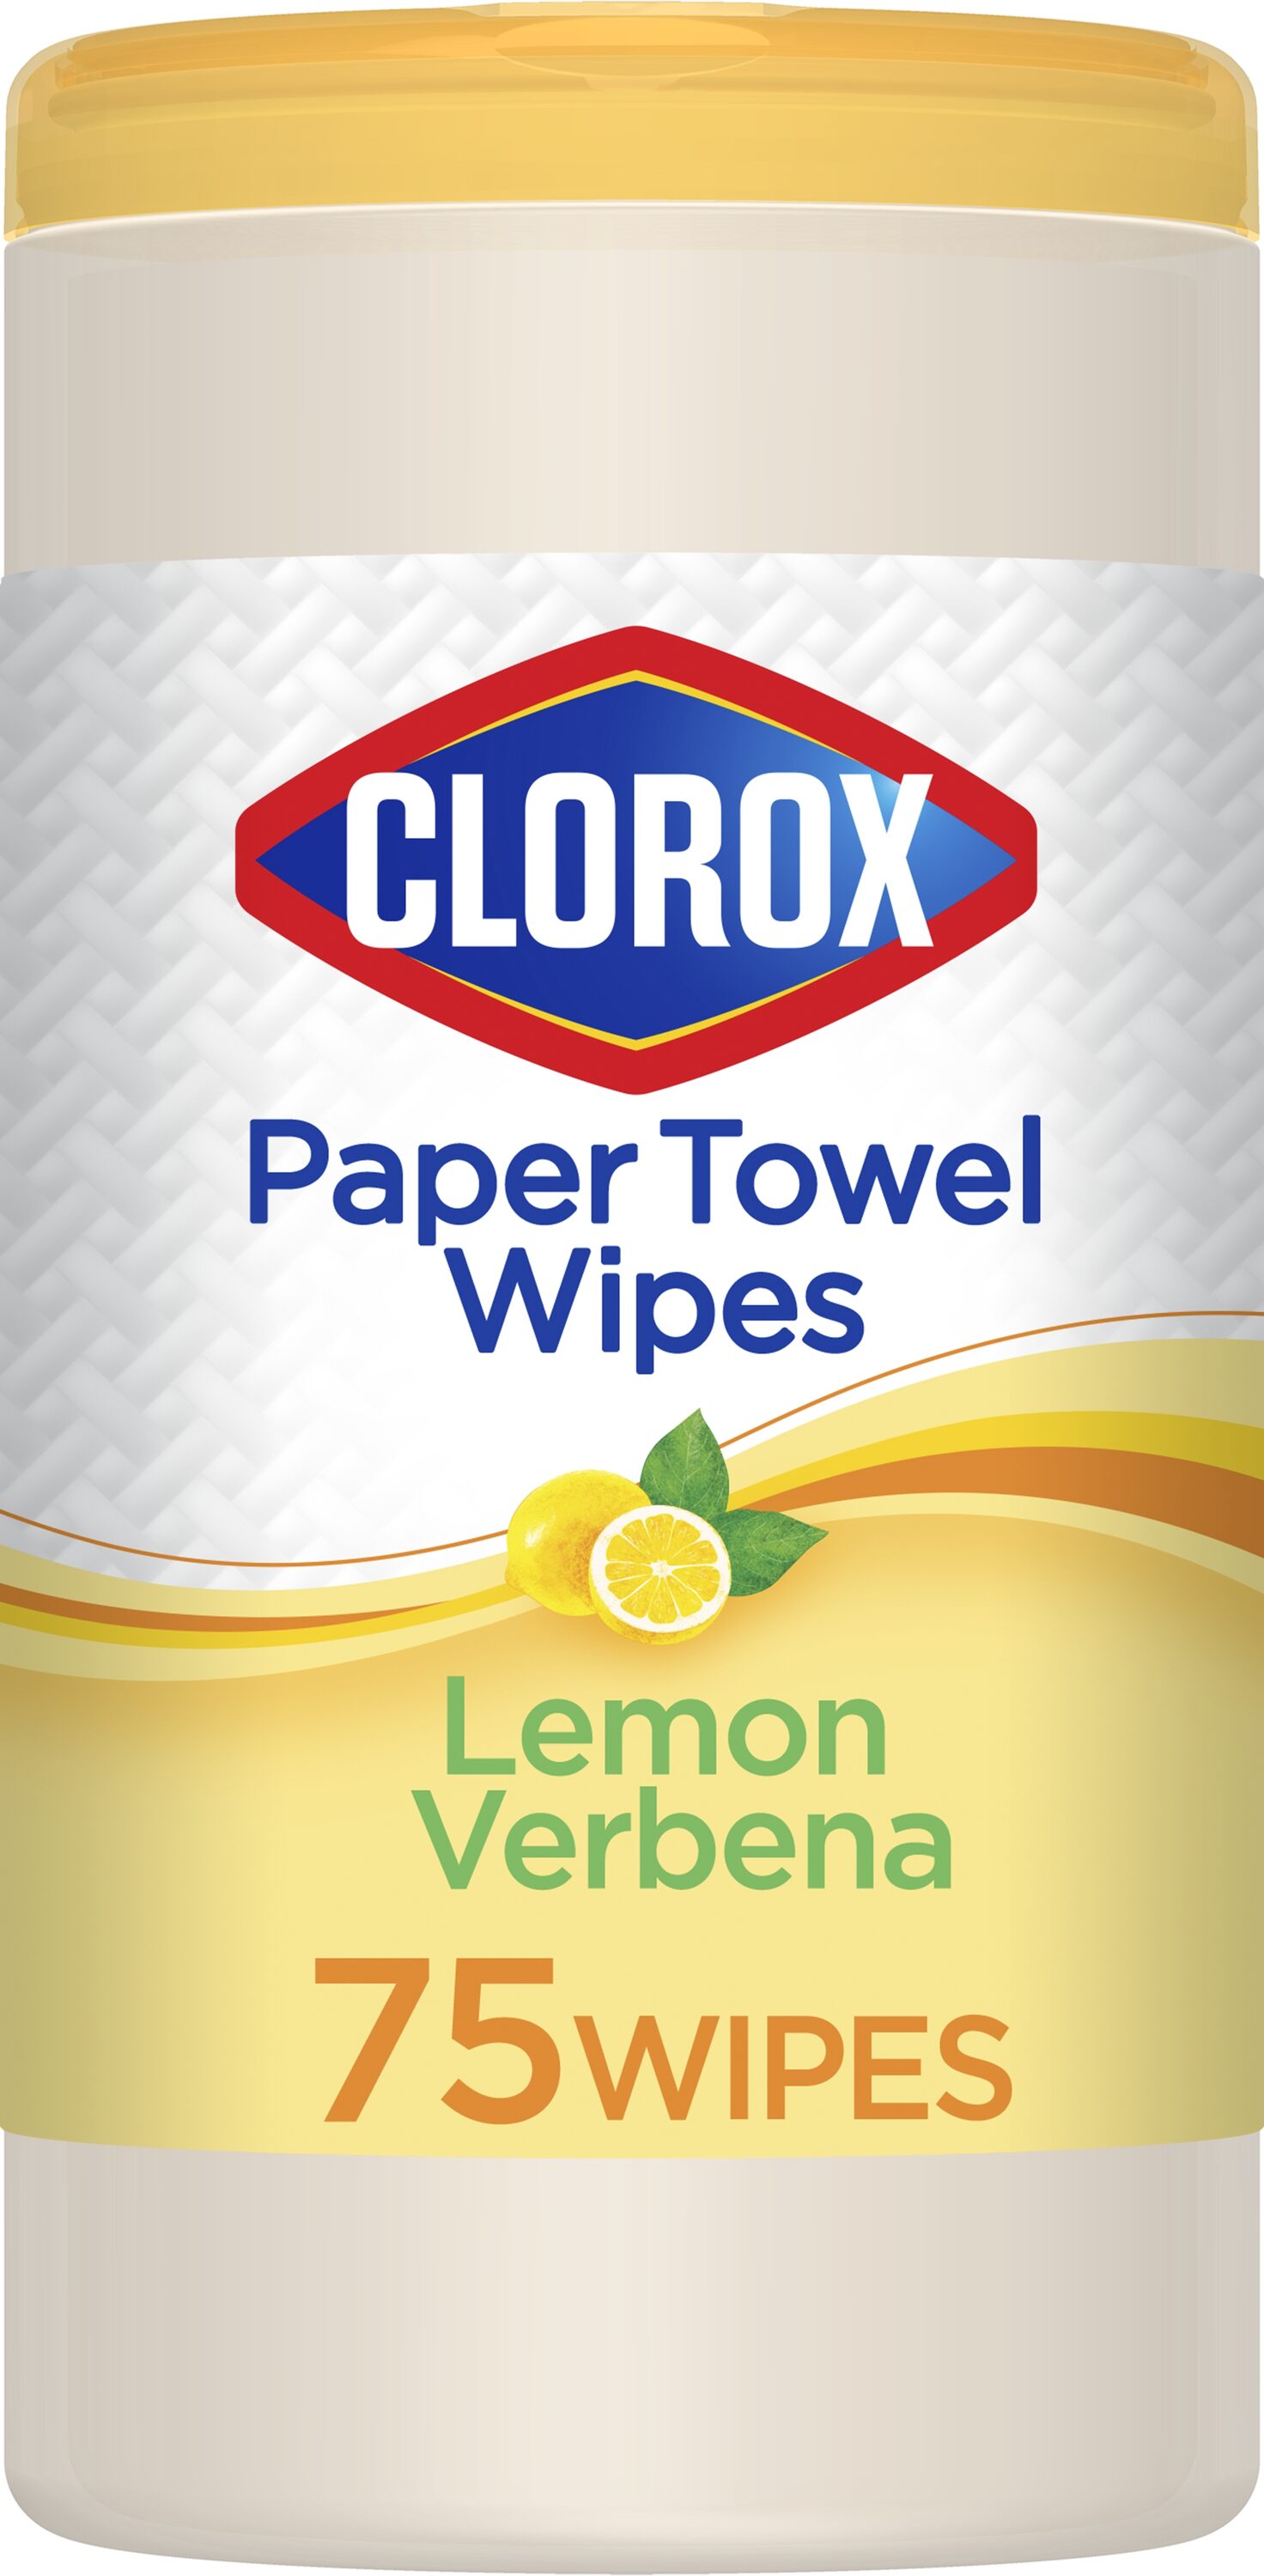 Clorox Compostable Cleaning Wipes - All Purpose Wipes - Simply Lemon, 75 Count (Pack of 3), White